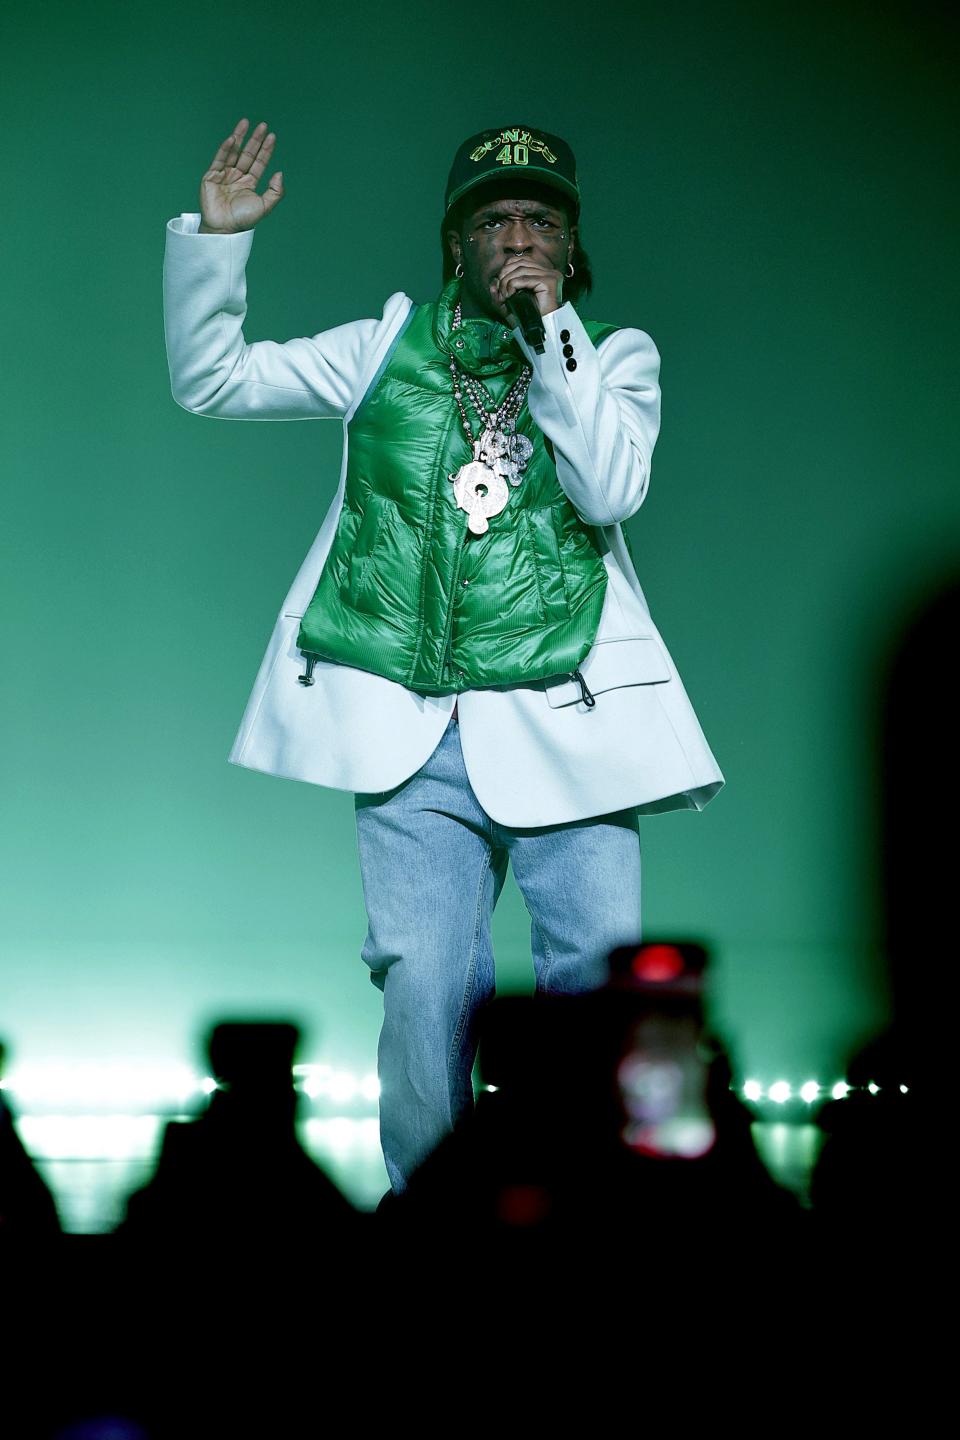 January 24, 2023: Lil Uzi Vert performs on stage during Drake Live From The Apollo Theater for SiriusXM and Sound 42 at The Apollo Theatre in New York City.